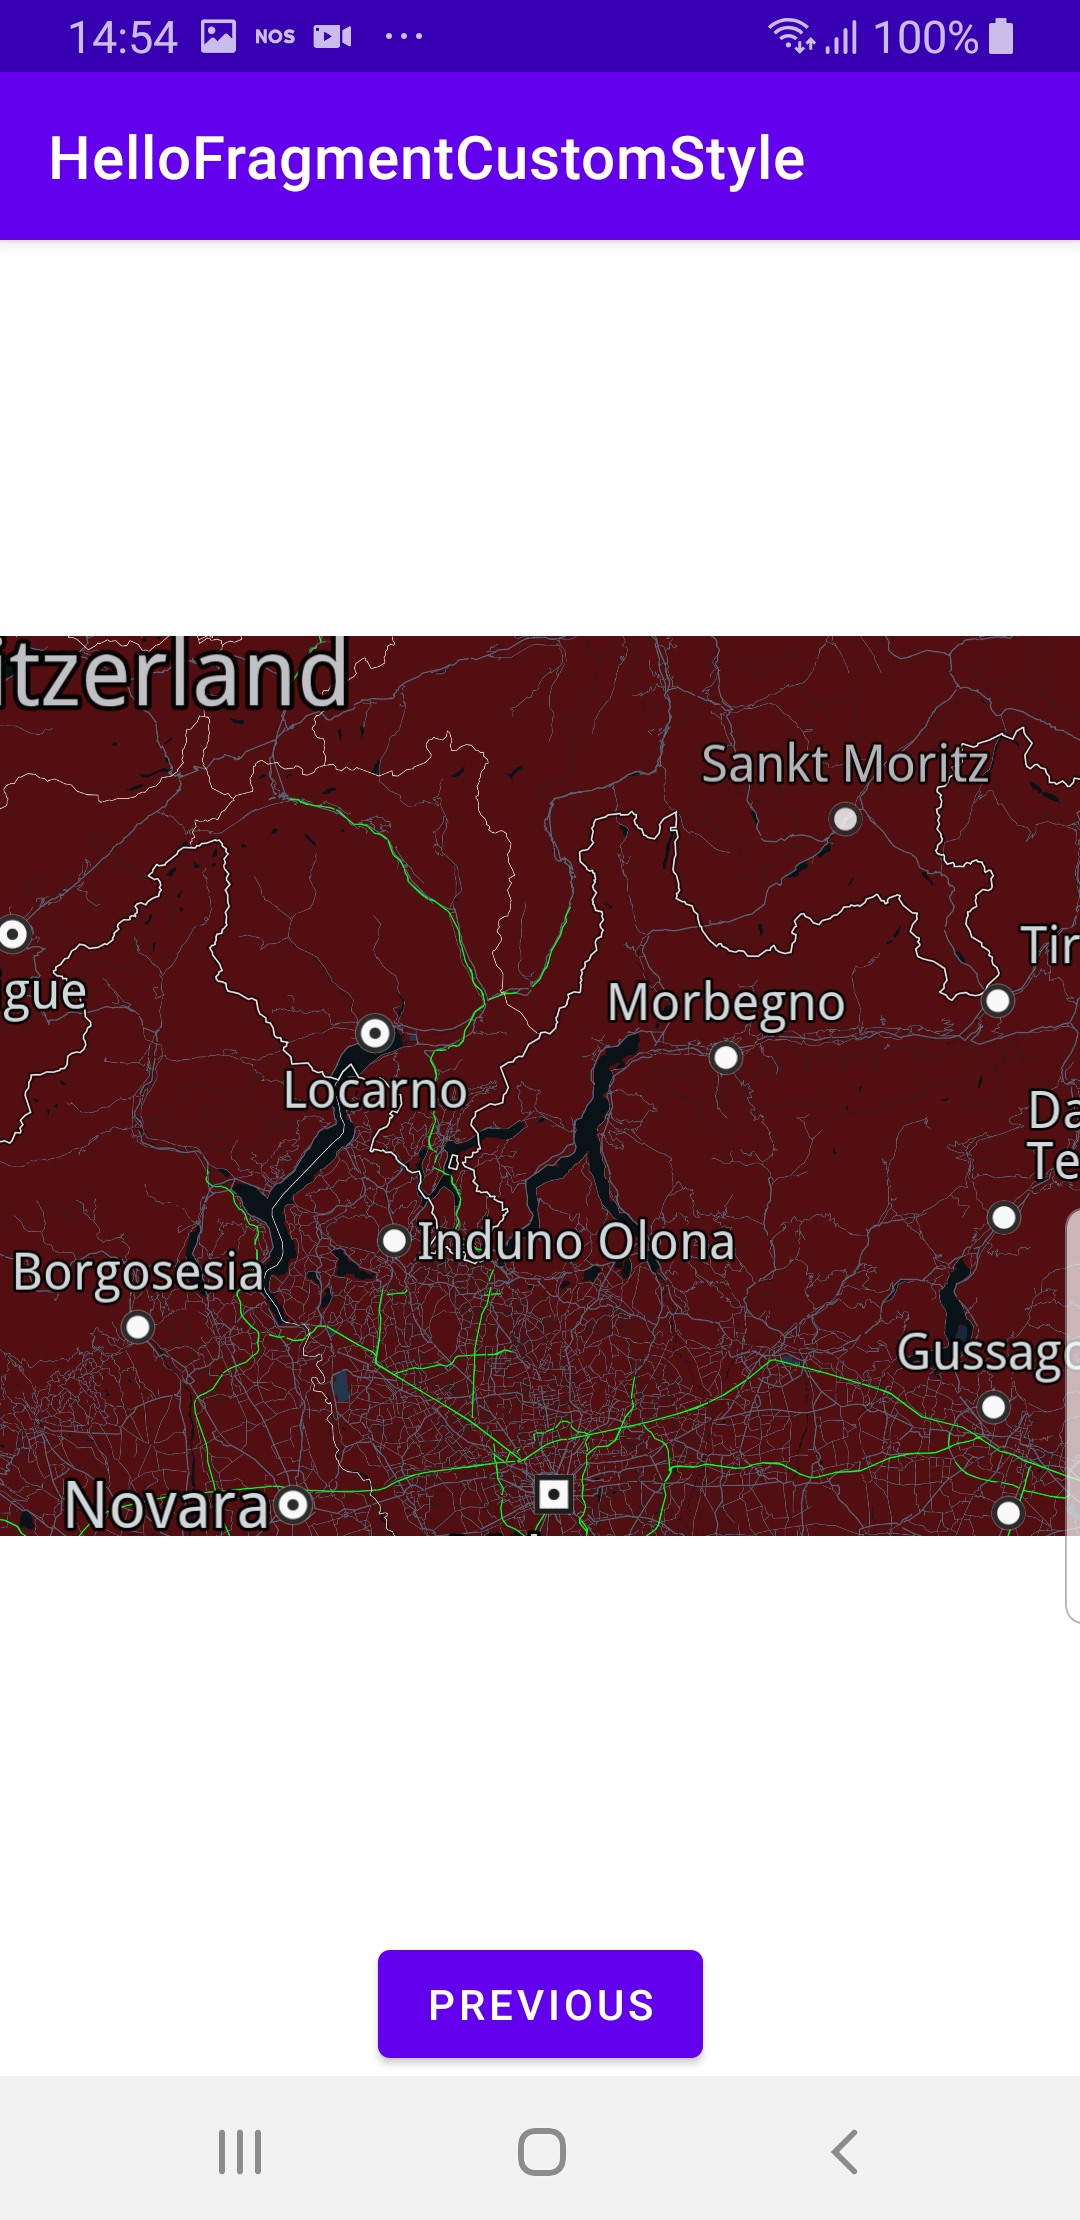 Map with custom style in an Android fragment screenshot